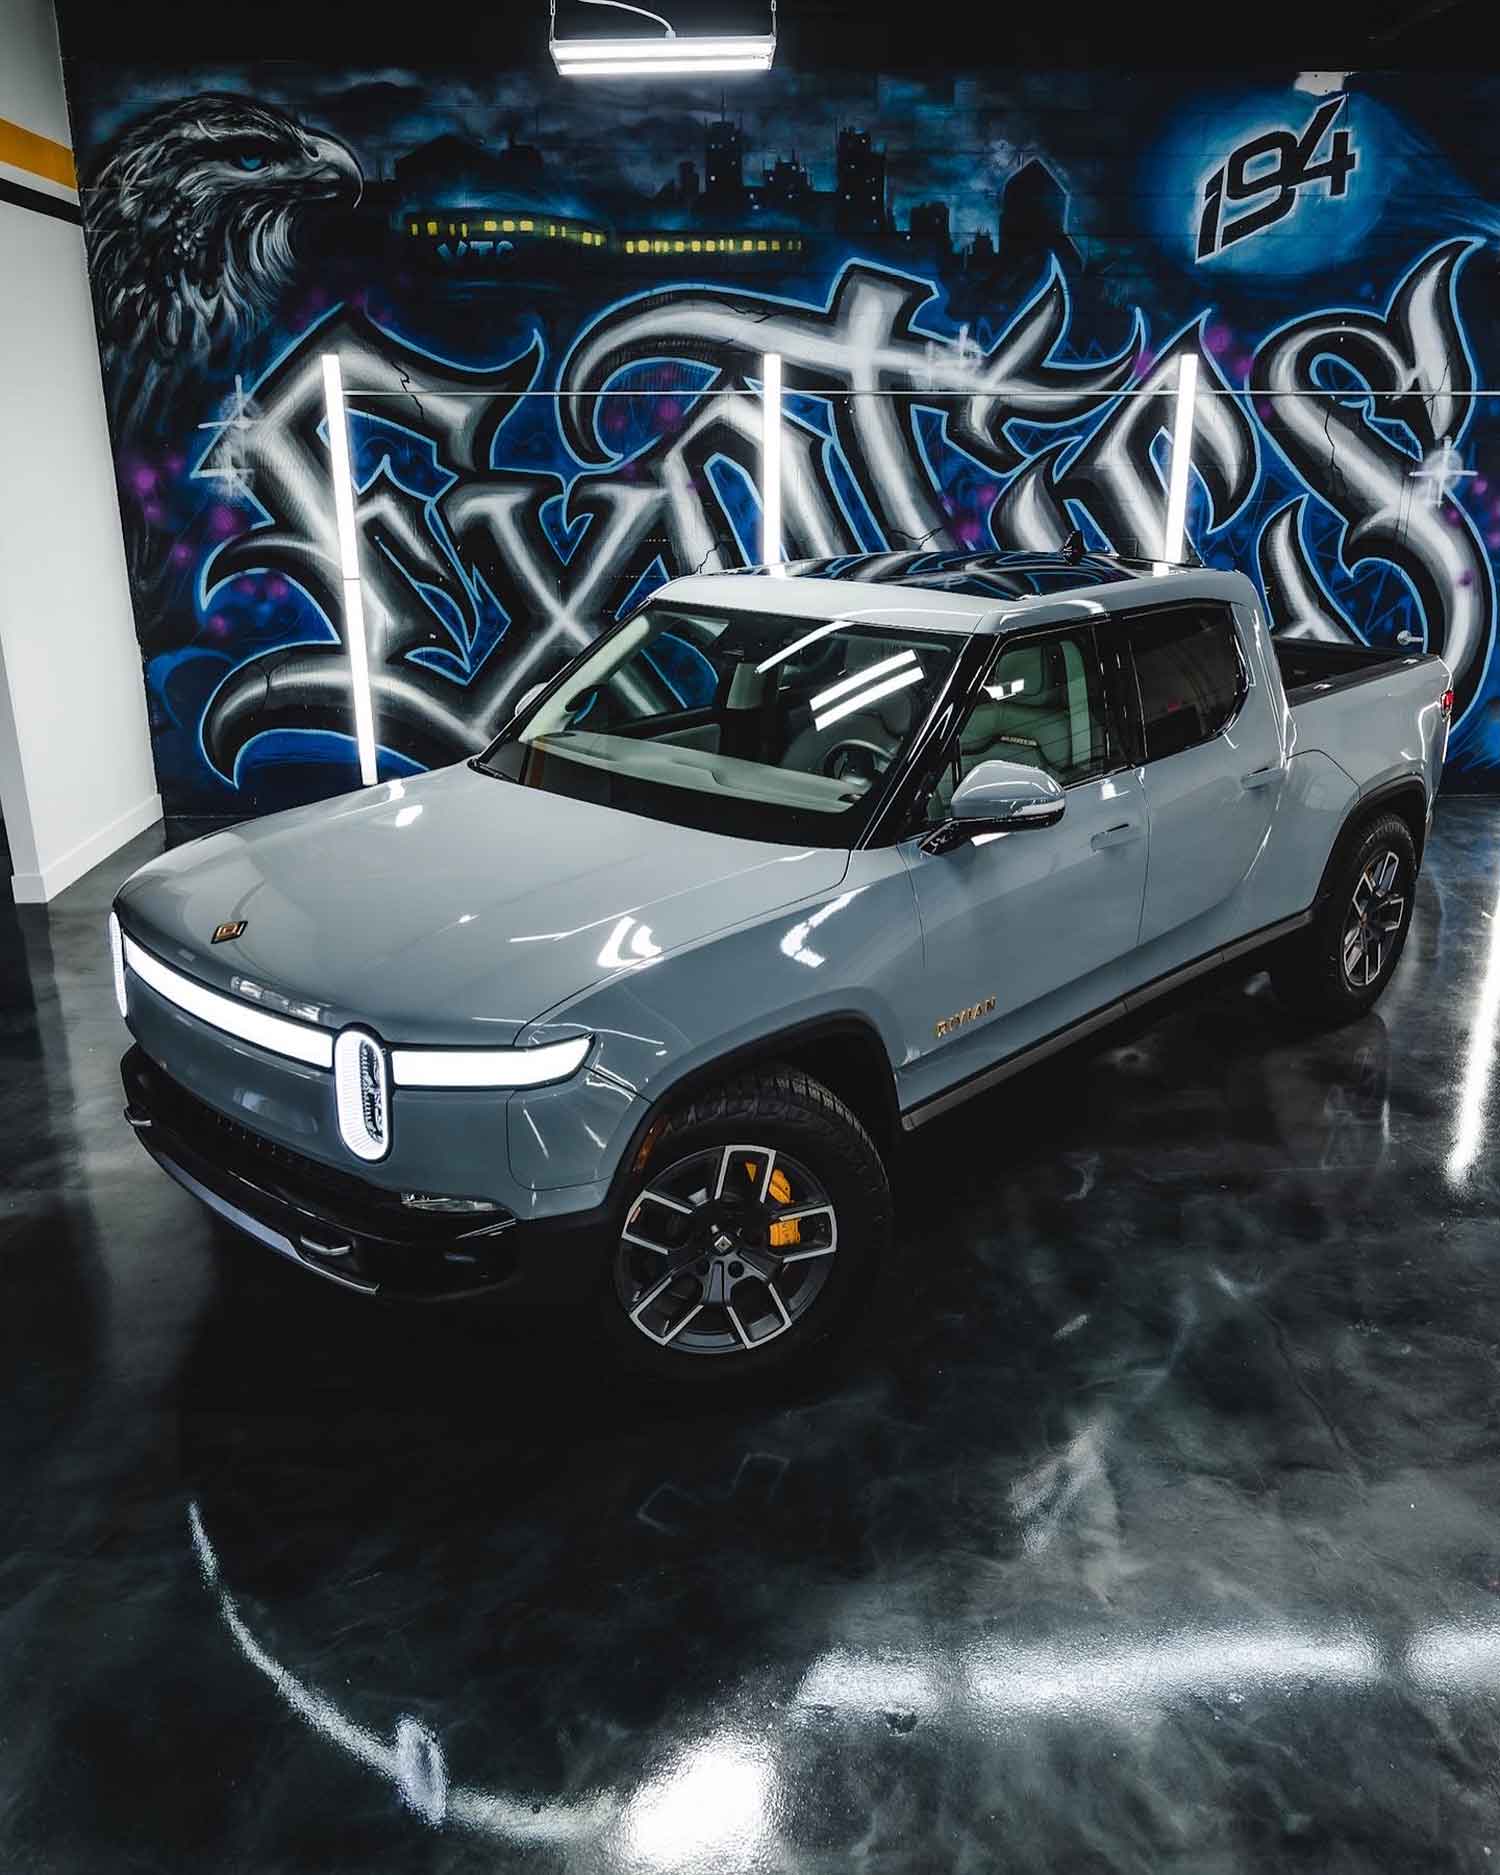 Glossy gray Rivian parked in brightly lit shop area at RestorFX Buffalo Grove with graffitied wall and black glossy floor